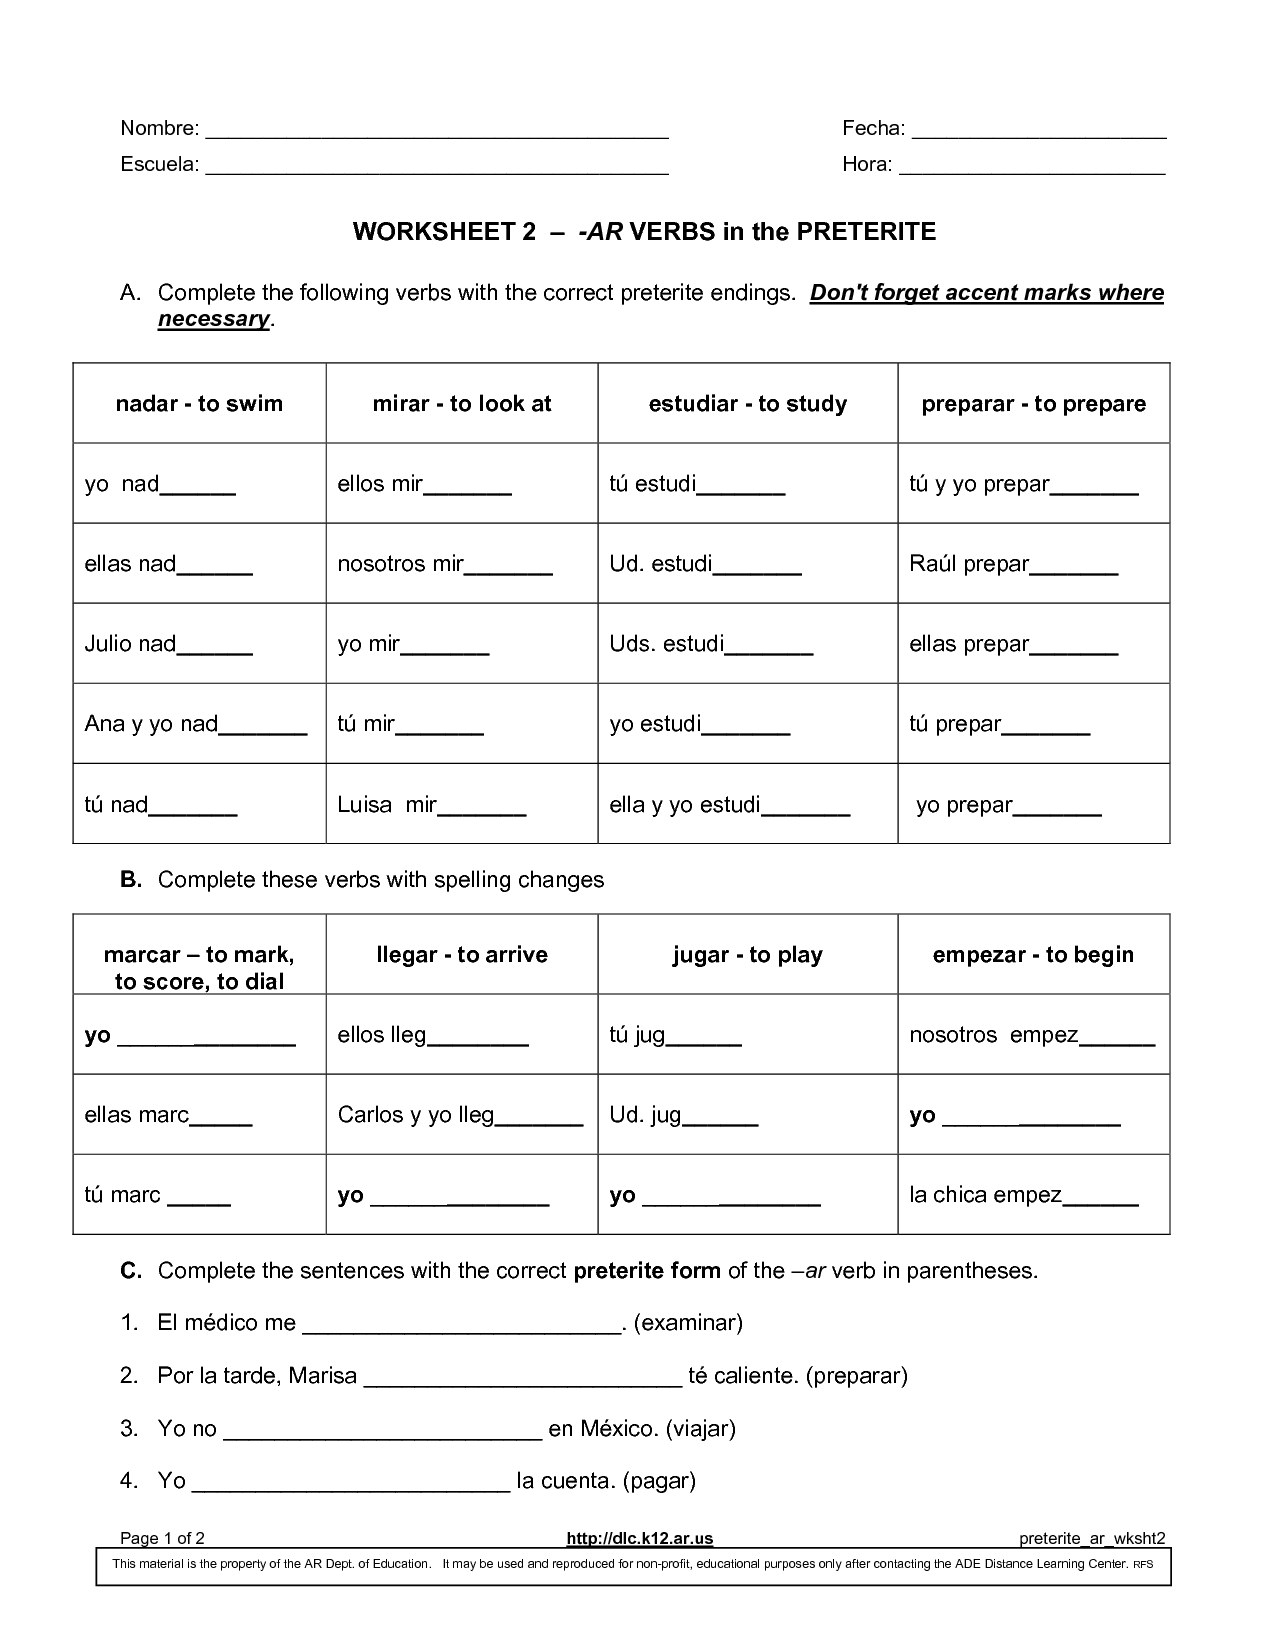 Ar Verbs In The Preterite Worksheet Answers